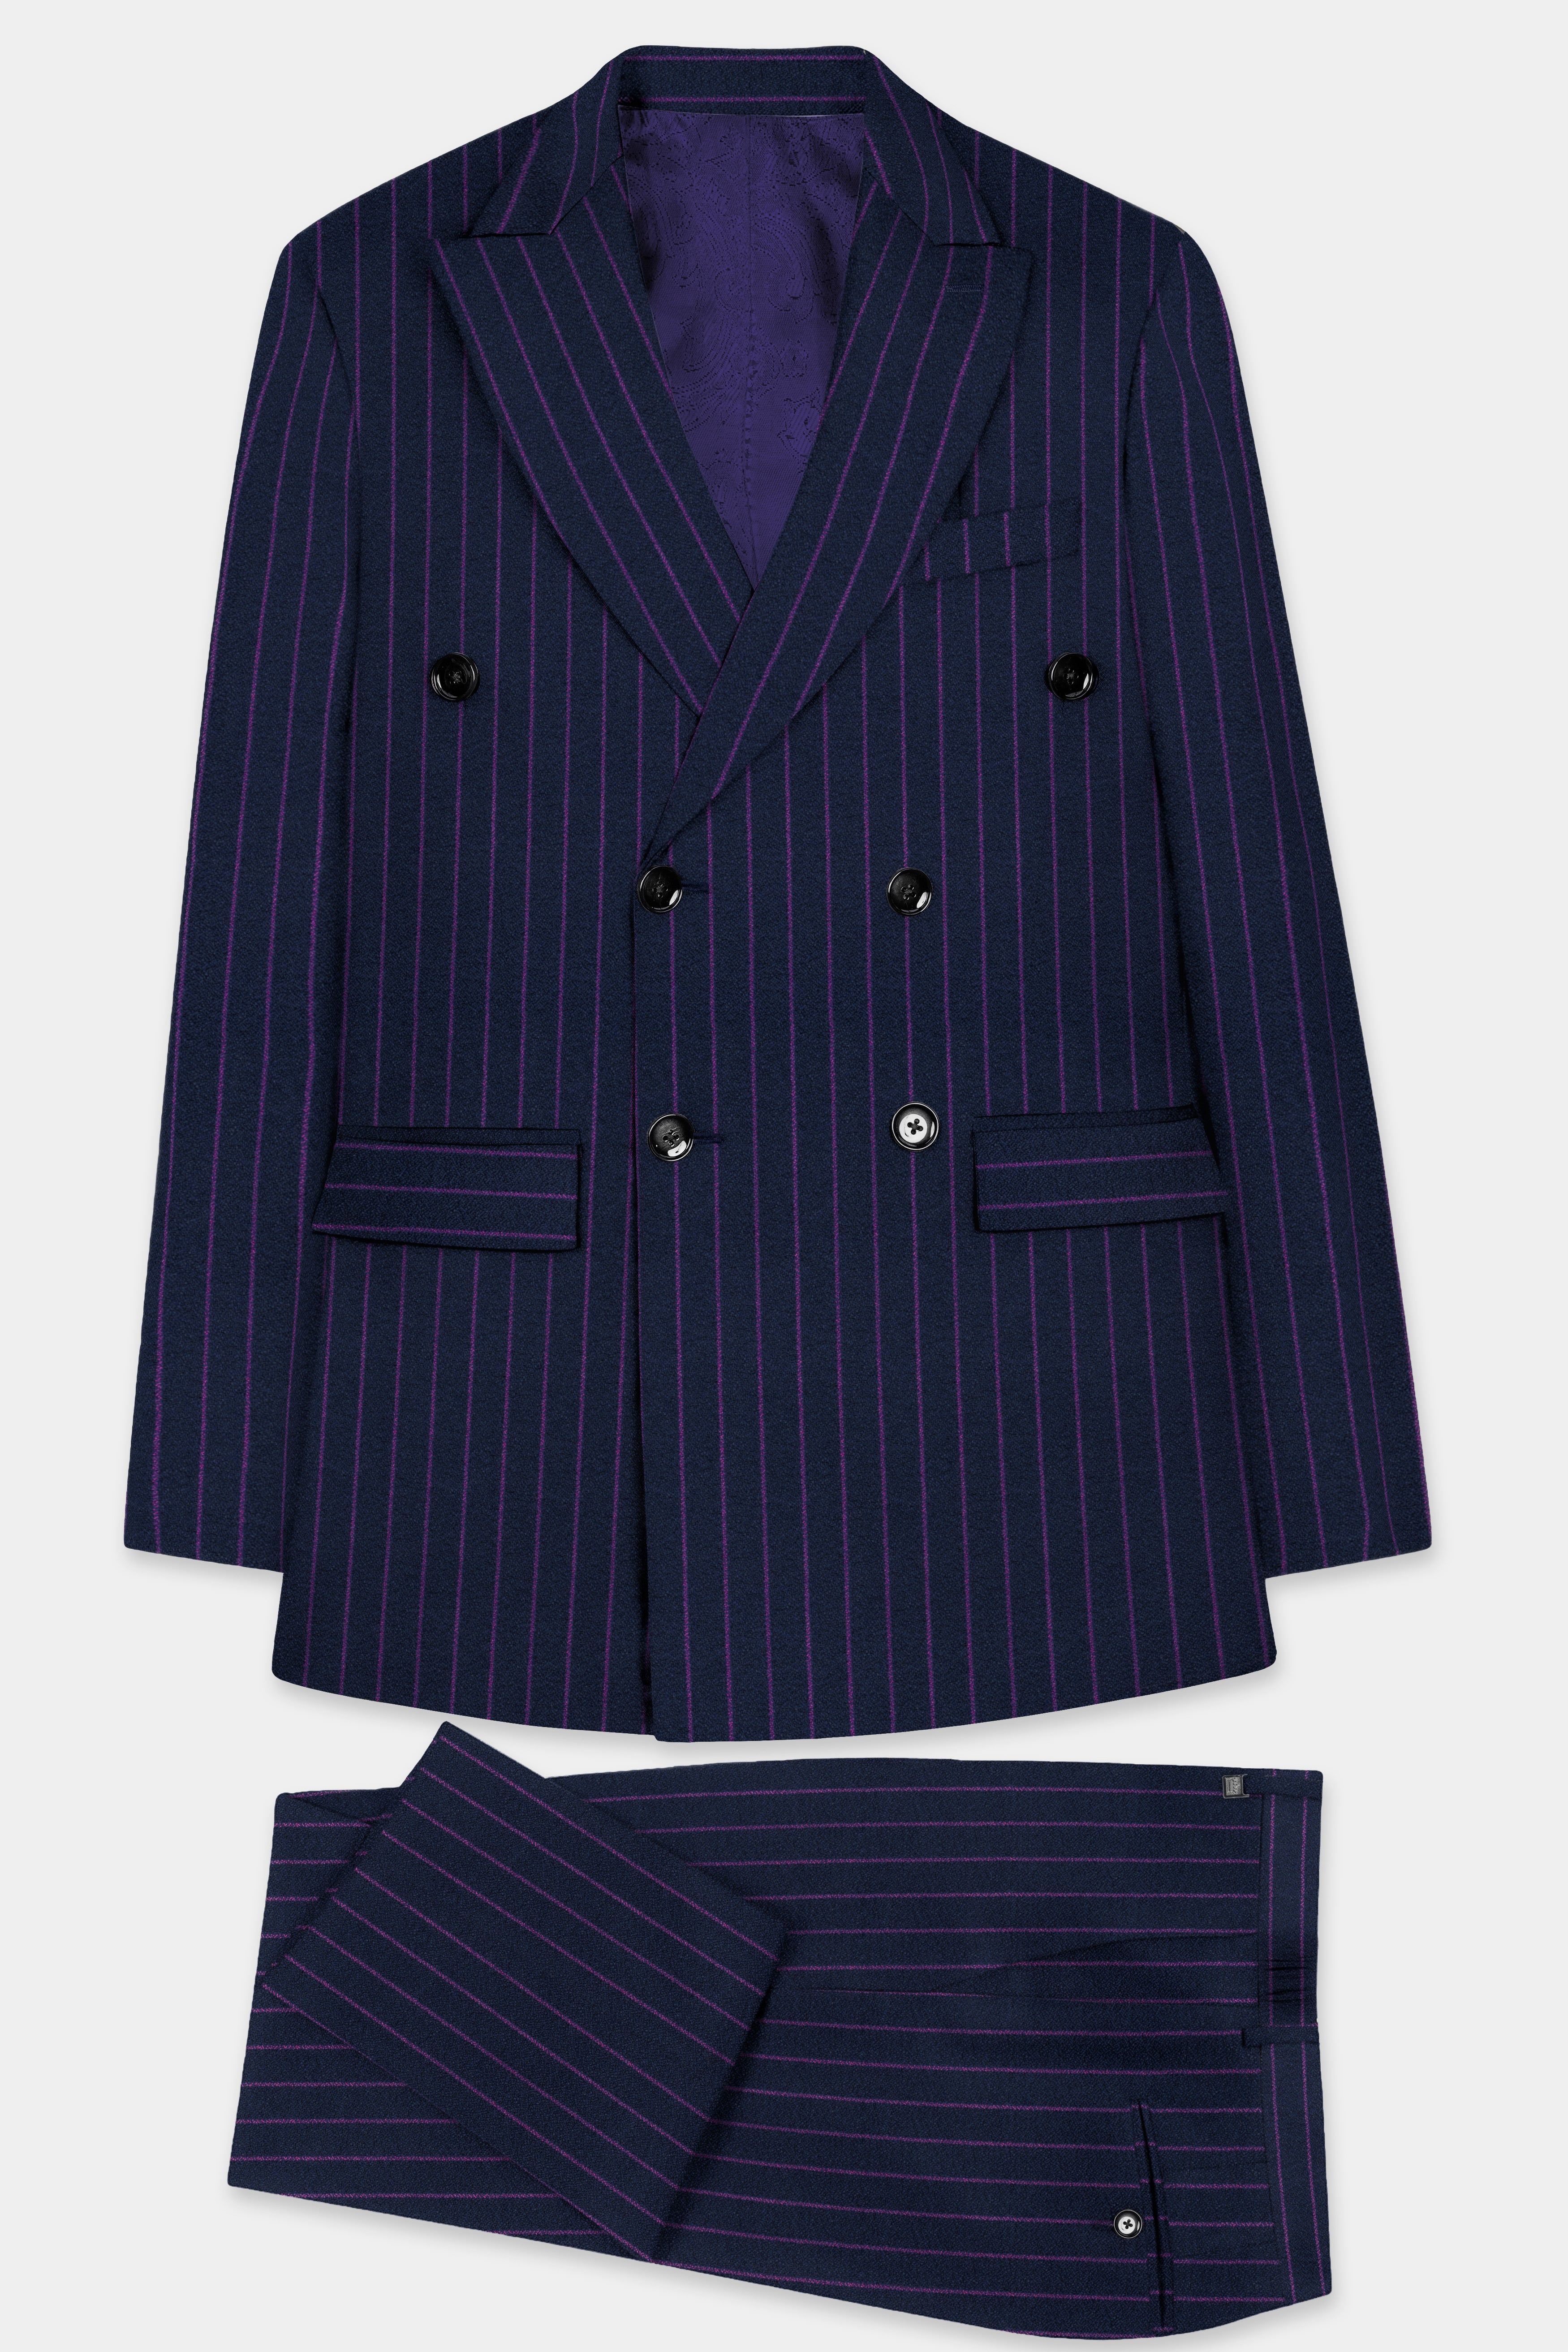 Steel Gray with Grape Purple Striped Wool Blend Double Breasted Suit